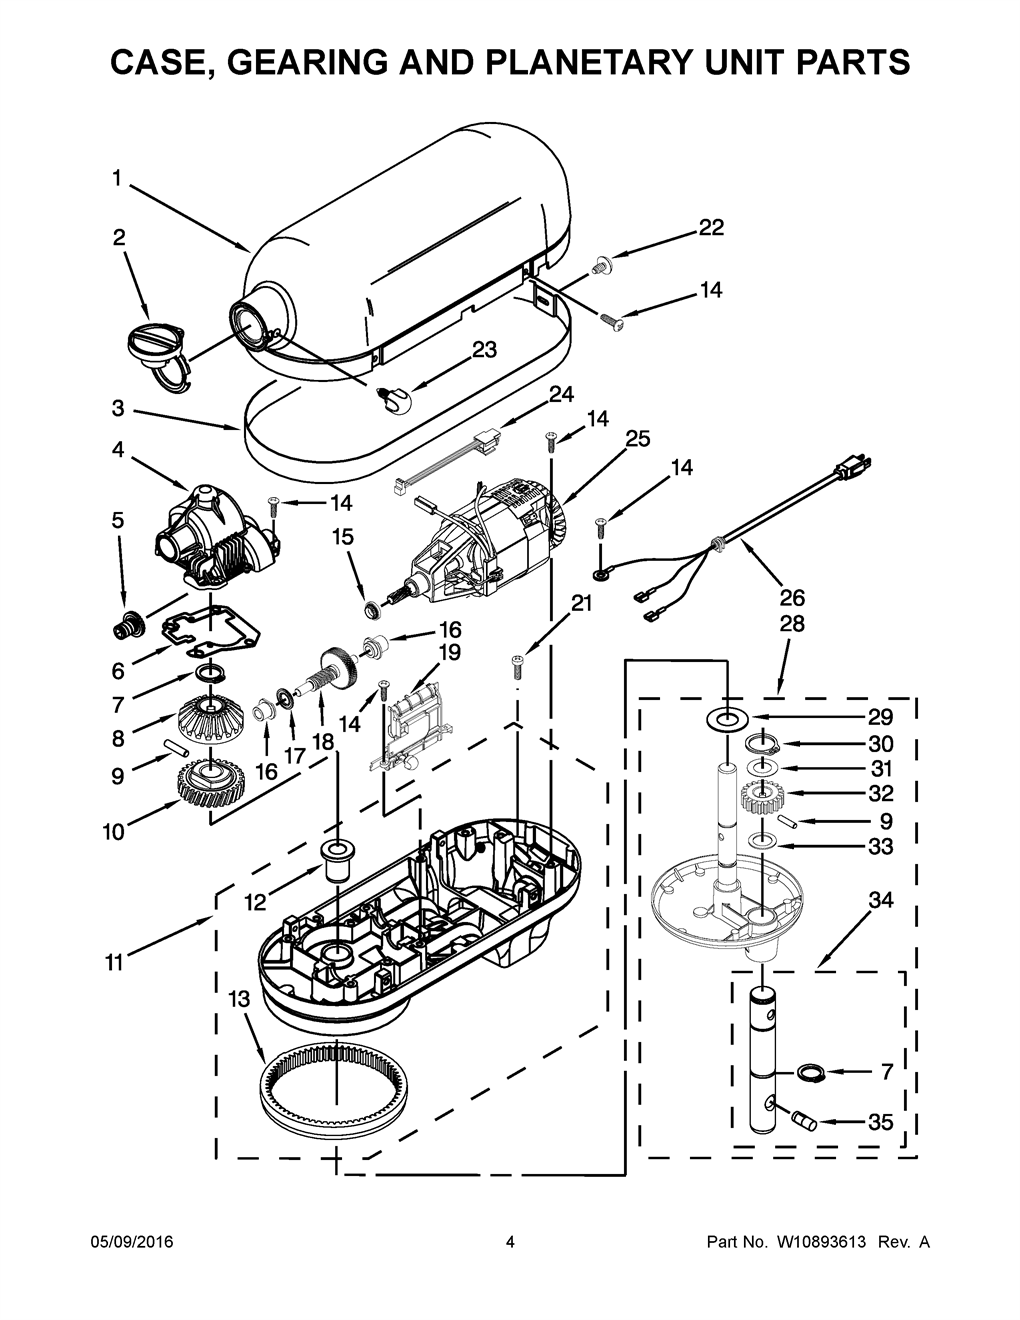 https://www.genuinereplacementparts.com/images/product_diagrams/kitchenaid/mixer/kp26m9xcwh5/03-case-gearing-and-planetary-unit-parts.jpg